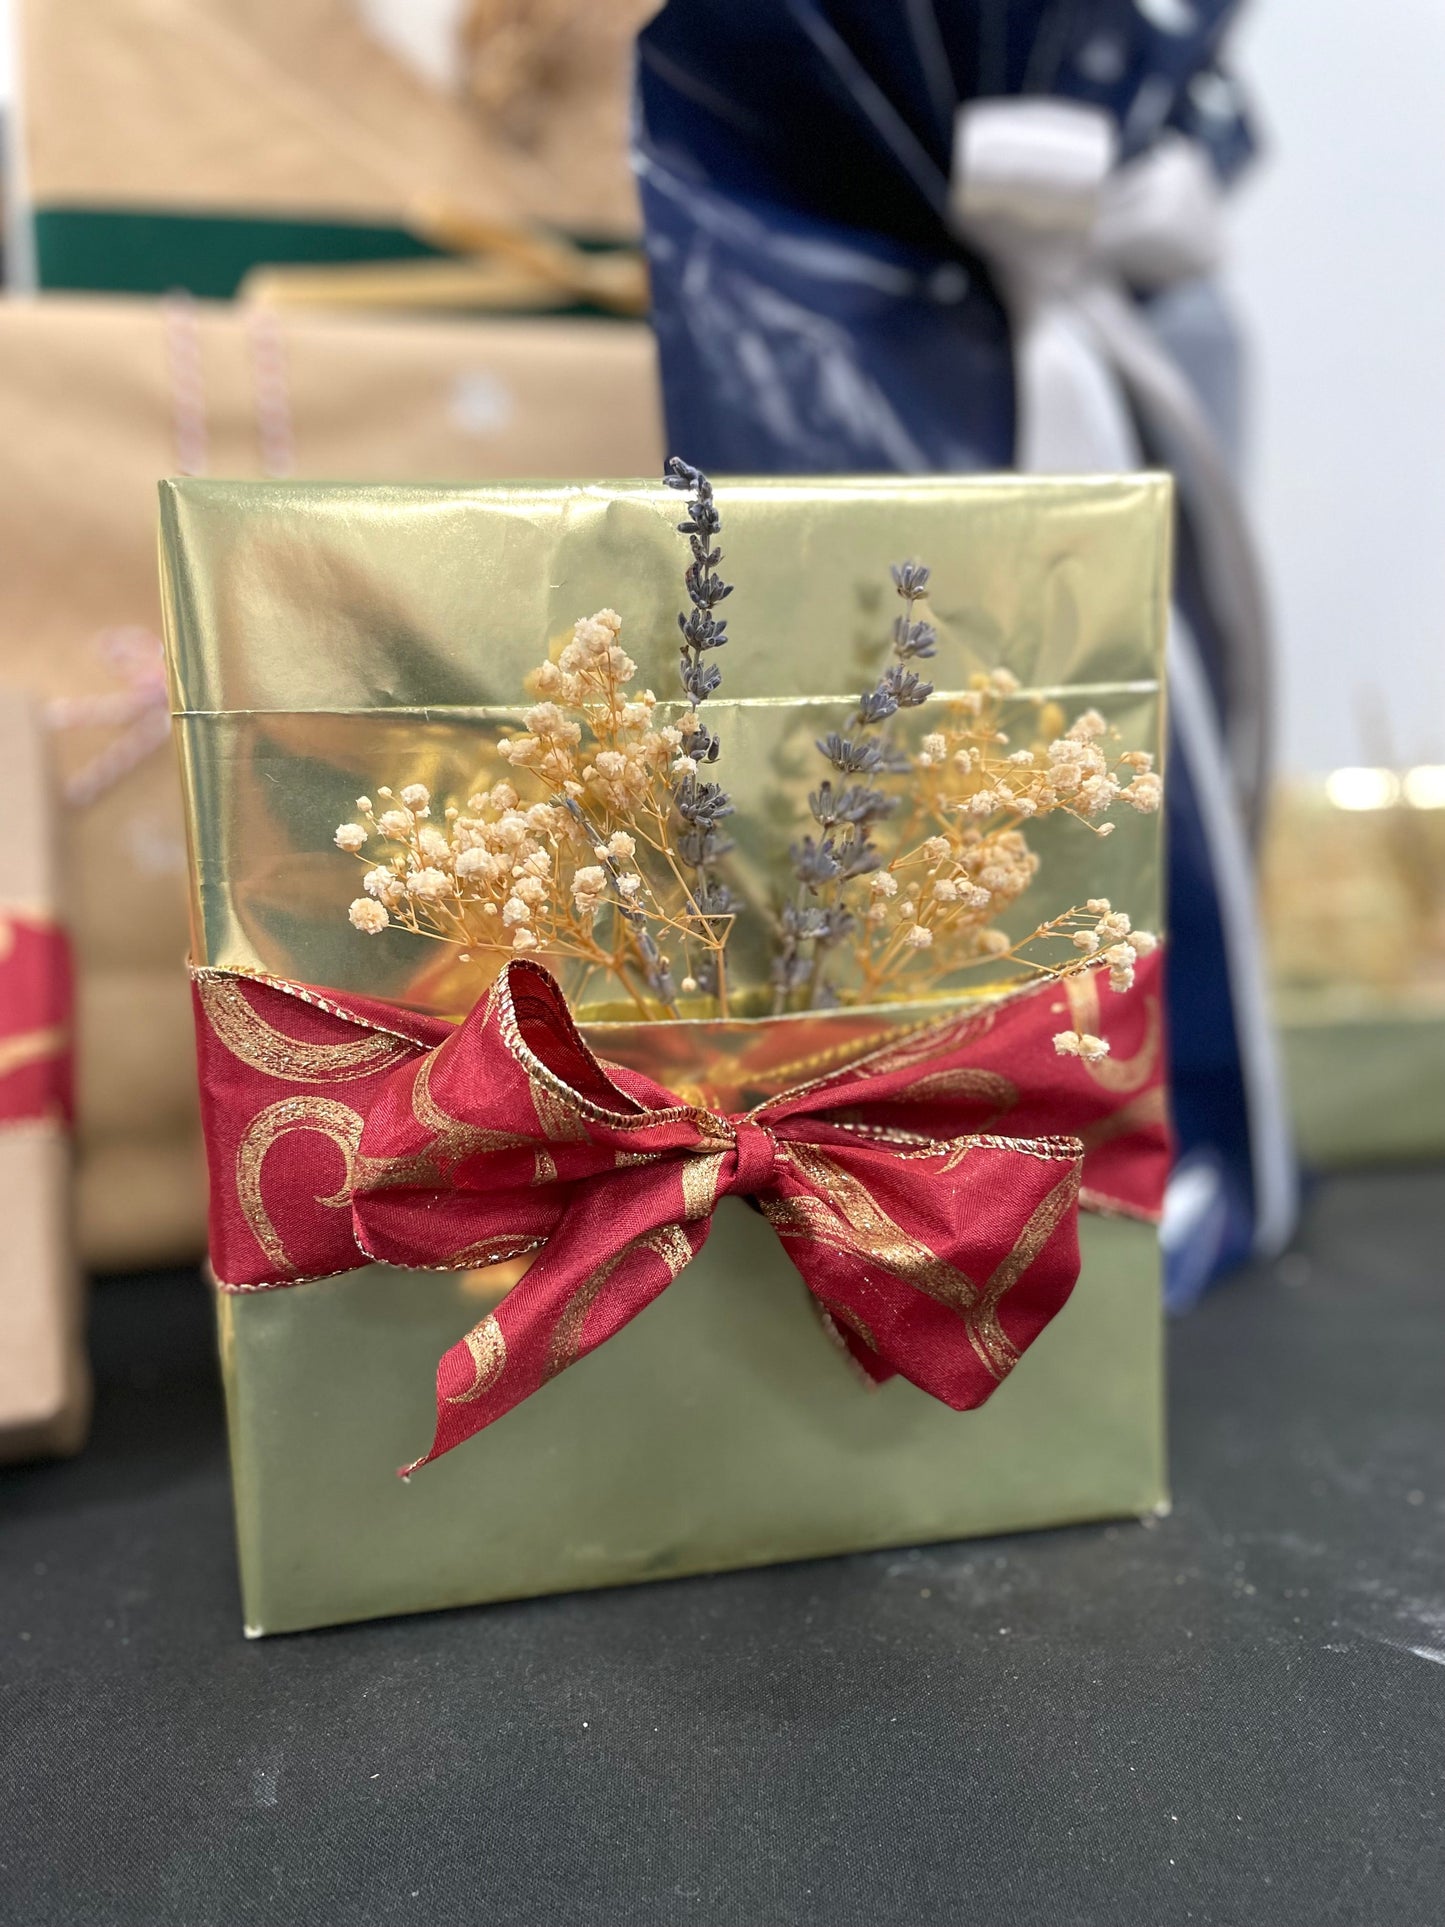 Sat, Dec 16th, 330-530p  "Creative Gift Wrapping” Private Houston Mobile DIY